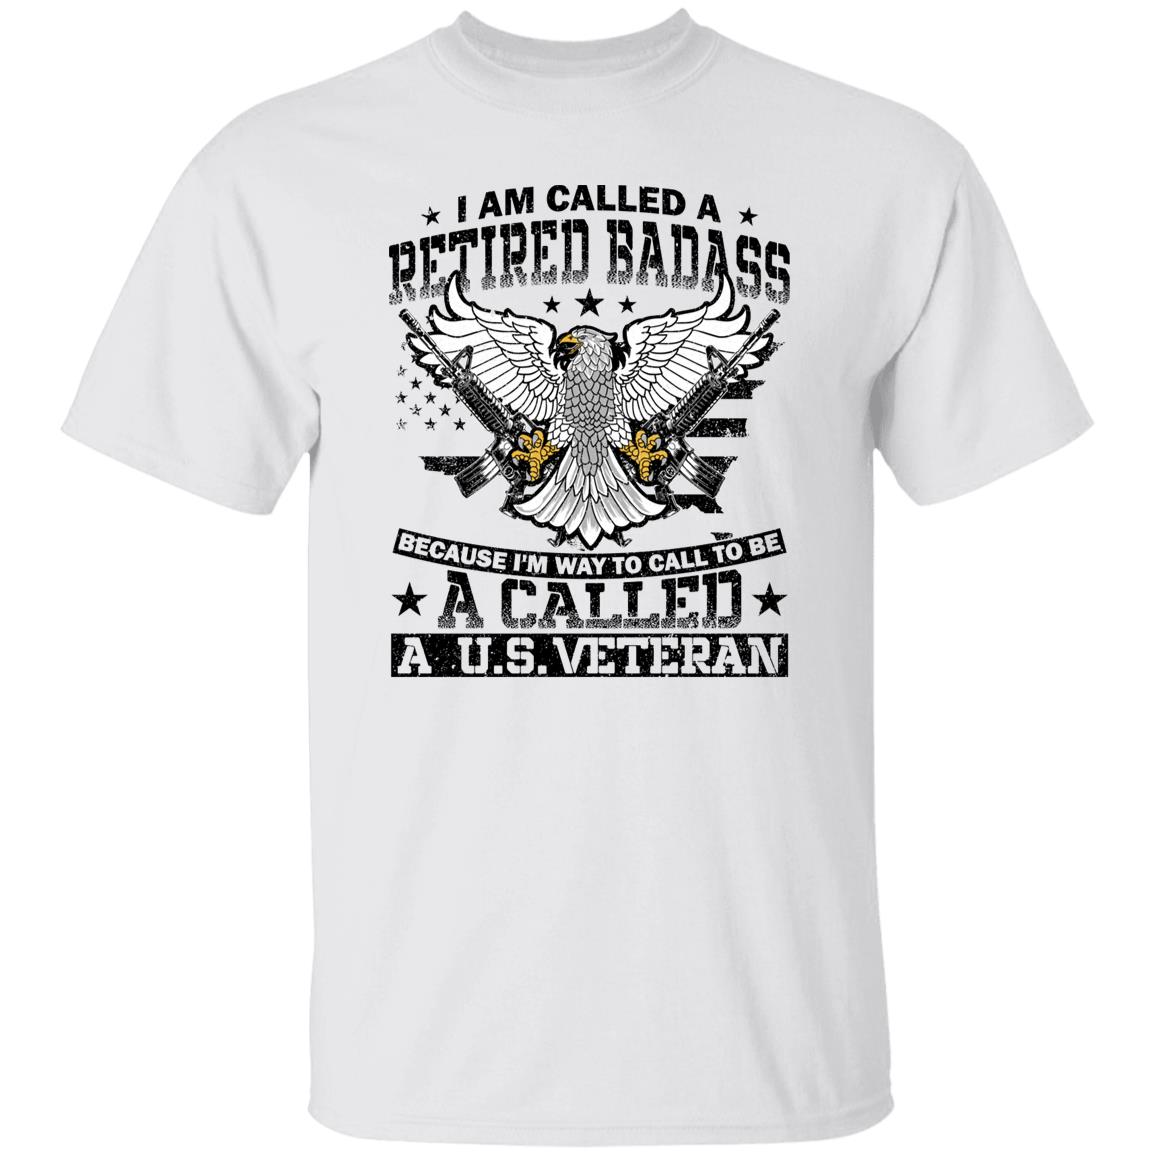 I am called a retired badass funny shirt for US veteran gift